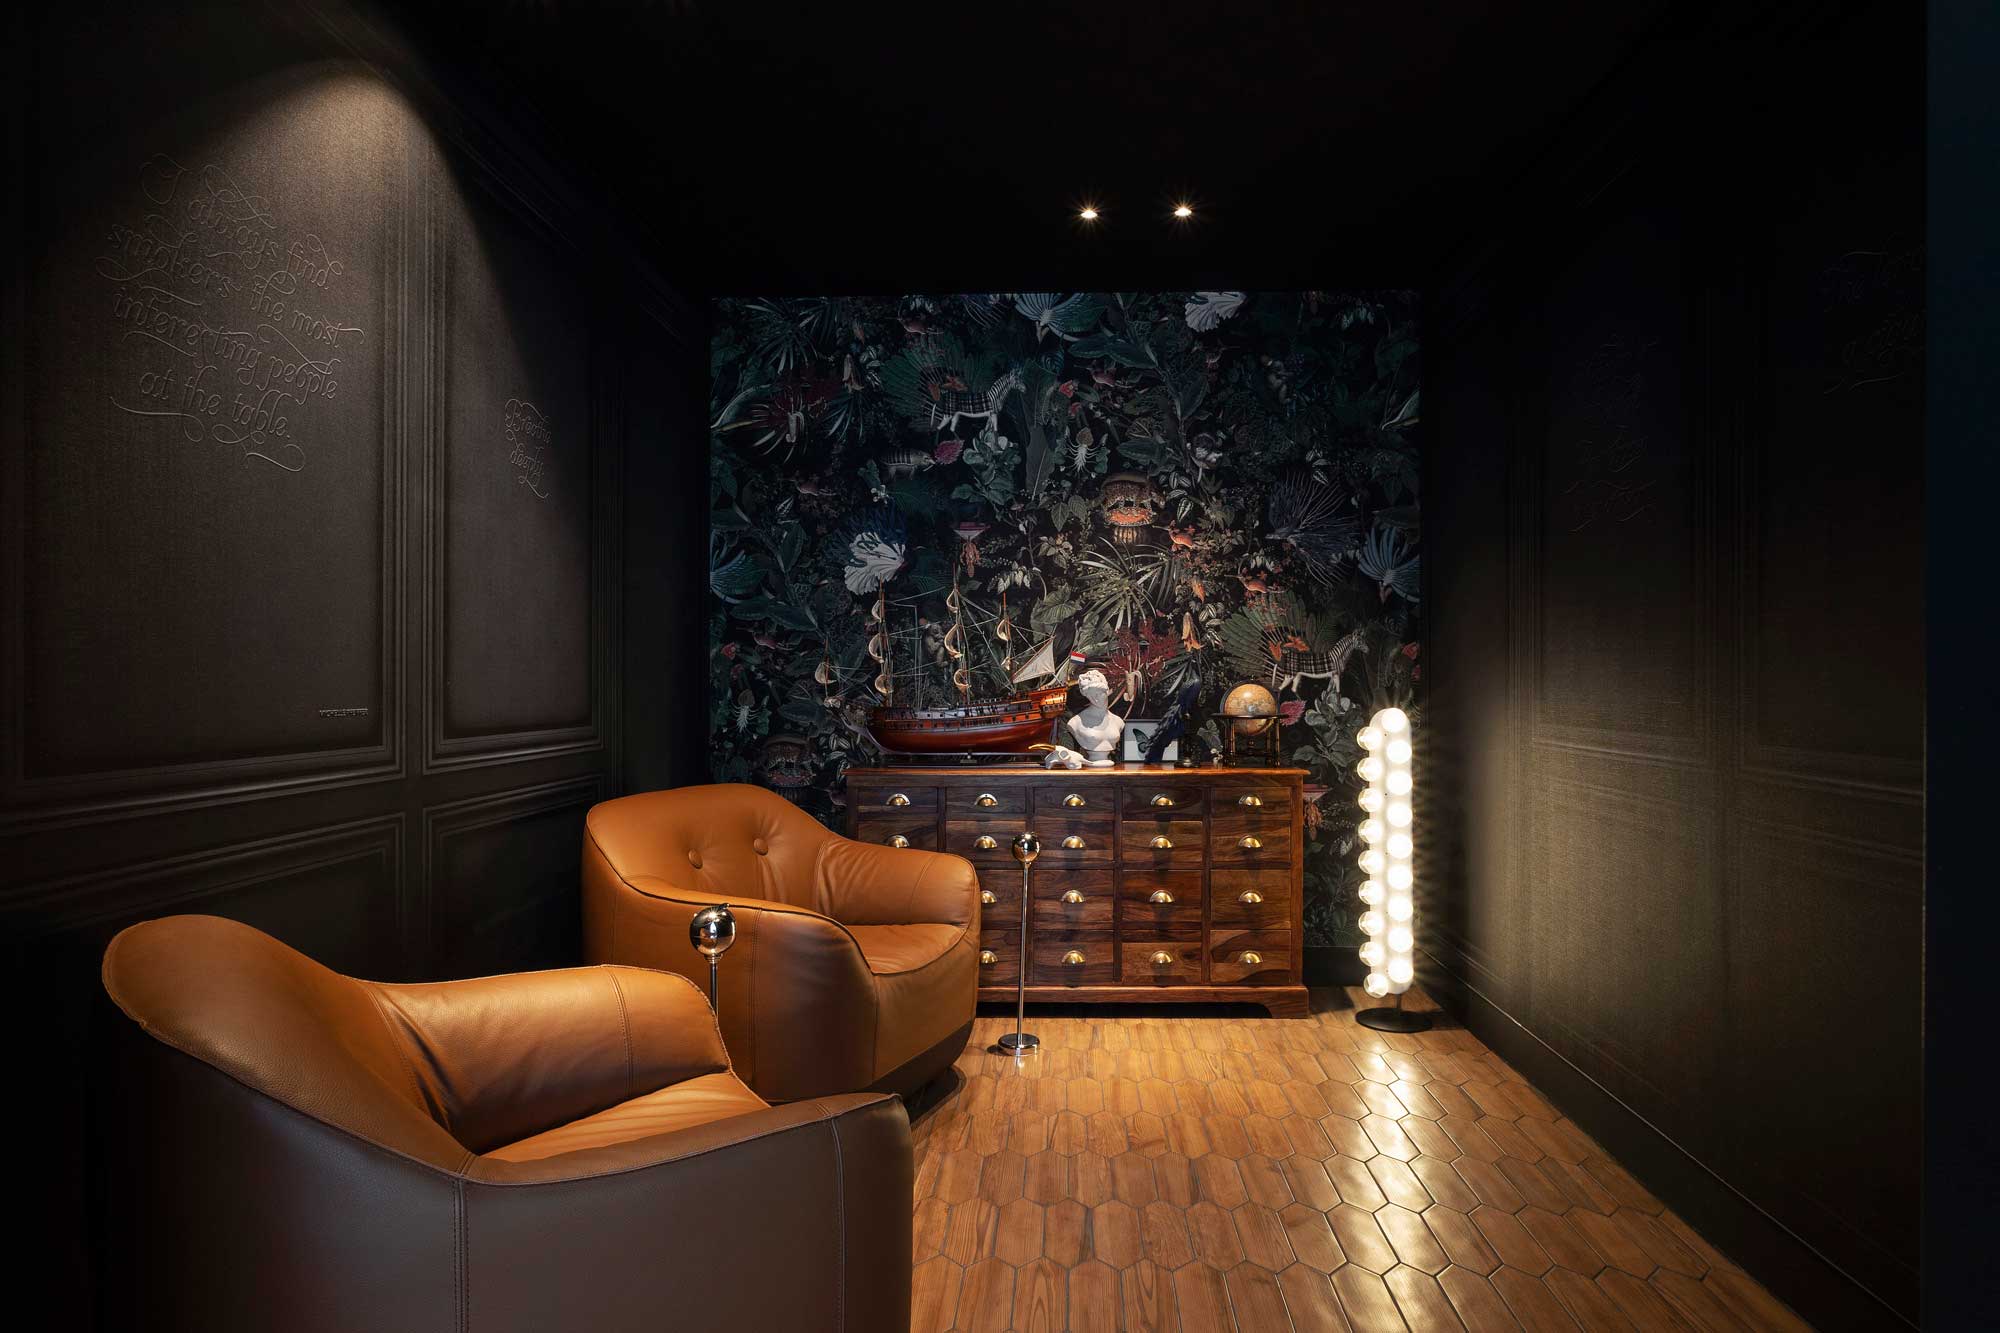 Interview with Marcel Wanders on the Next Big Thing in Hotel Interior Design